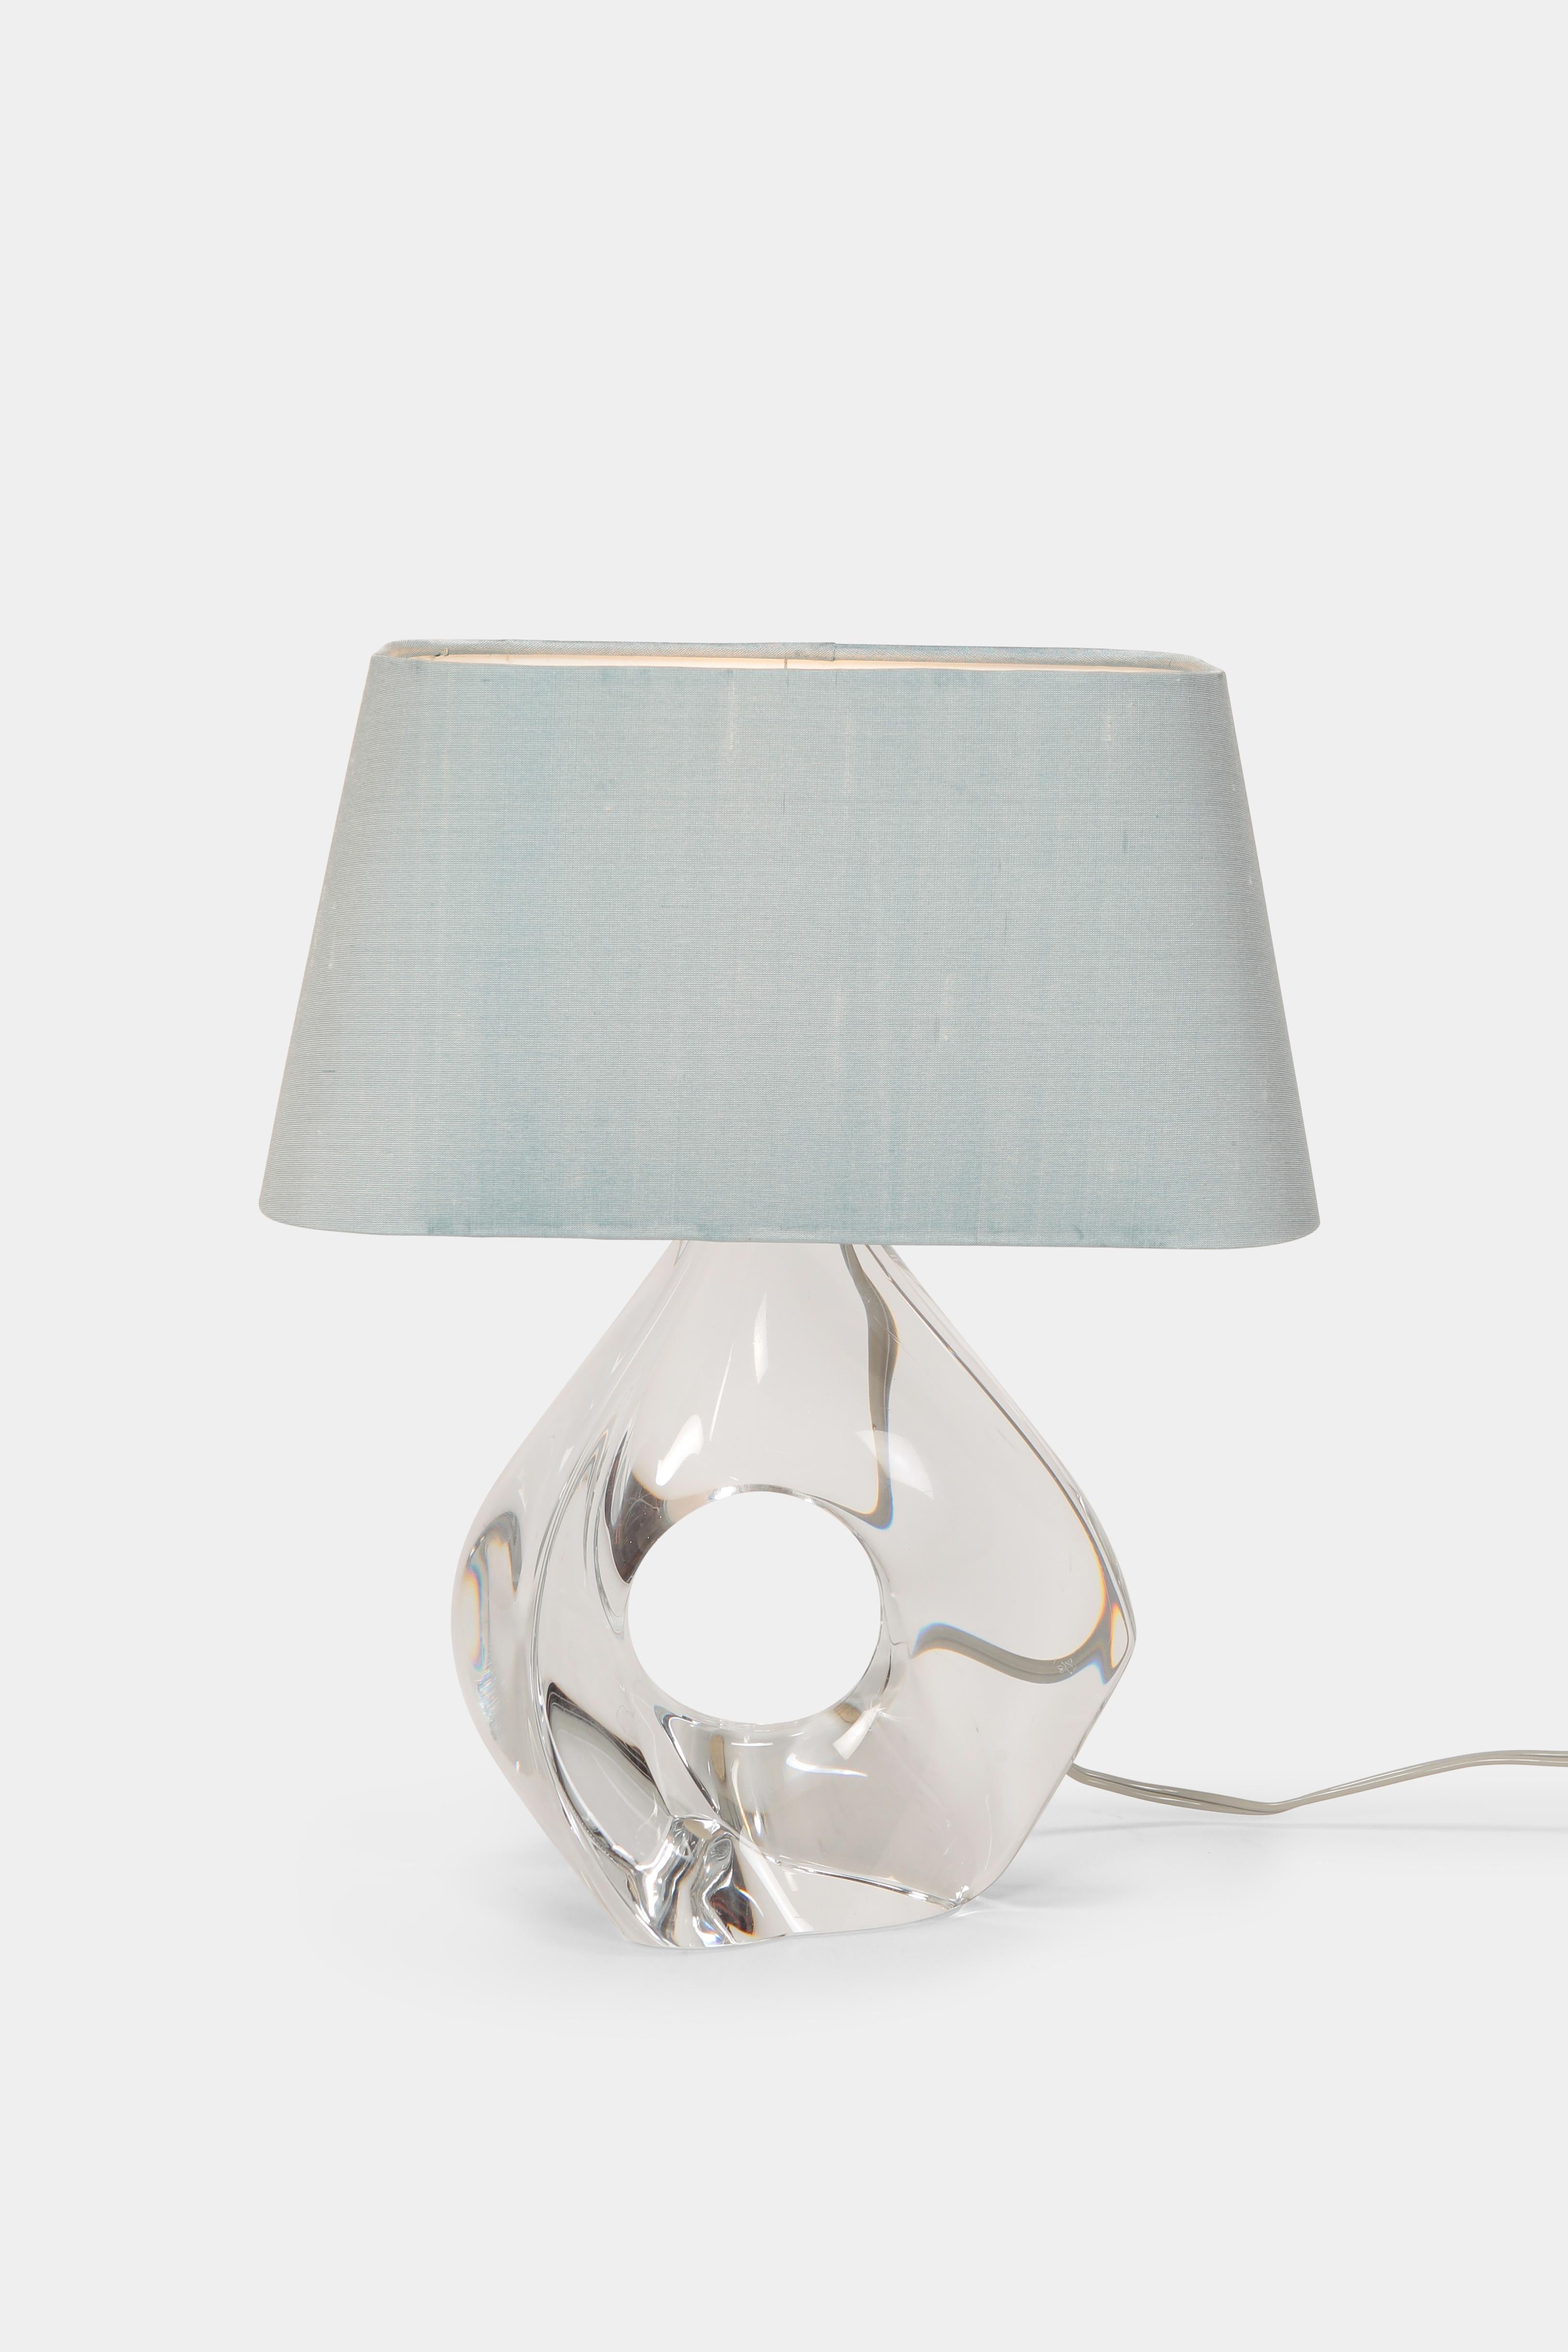 Jean Daum crystal table lamp manufactured by Daum France in the 1960s in France. Elegant shaped, sculptured base made of clear crystal glass. New ice blue cotton lamp shade. Graved from the manufacturer.